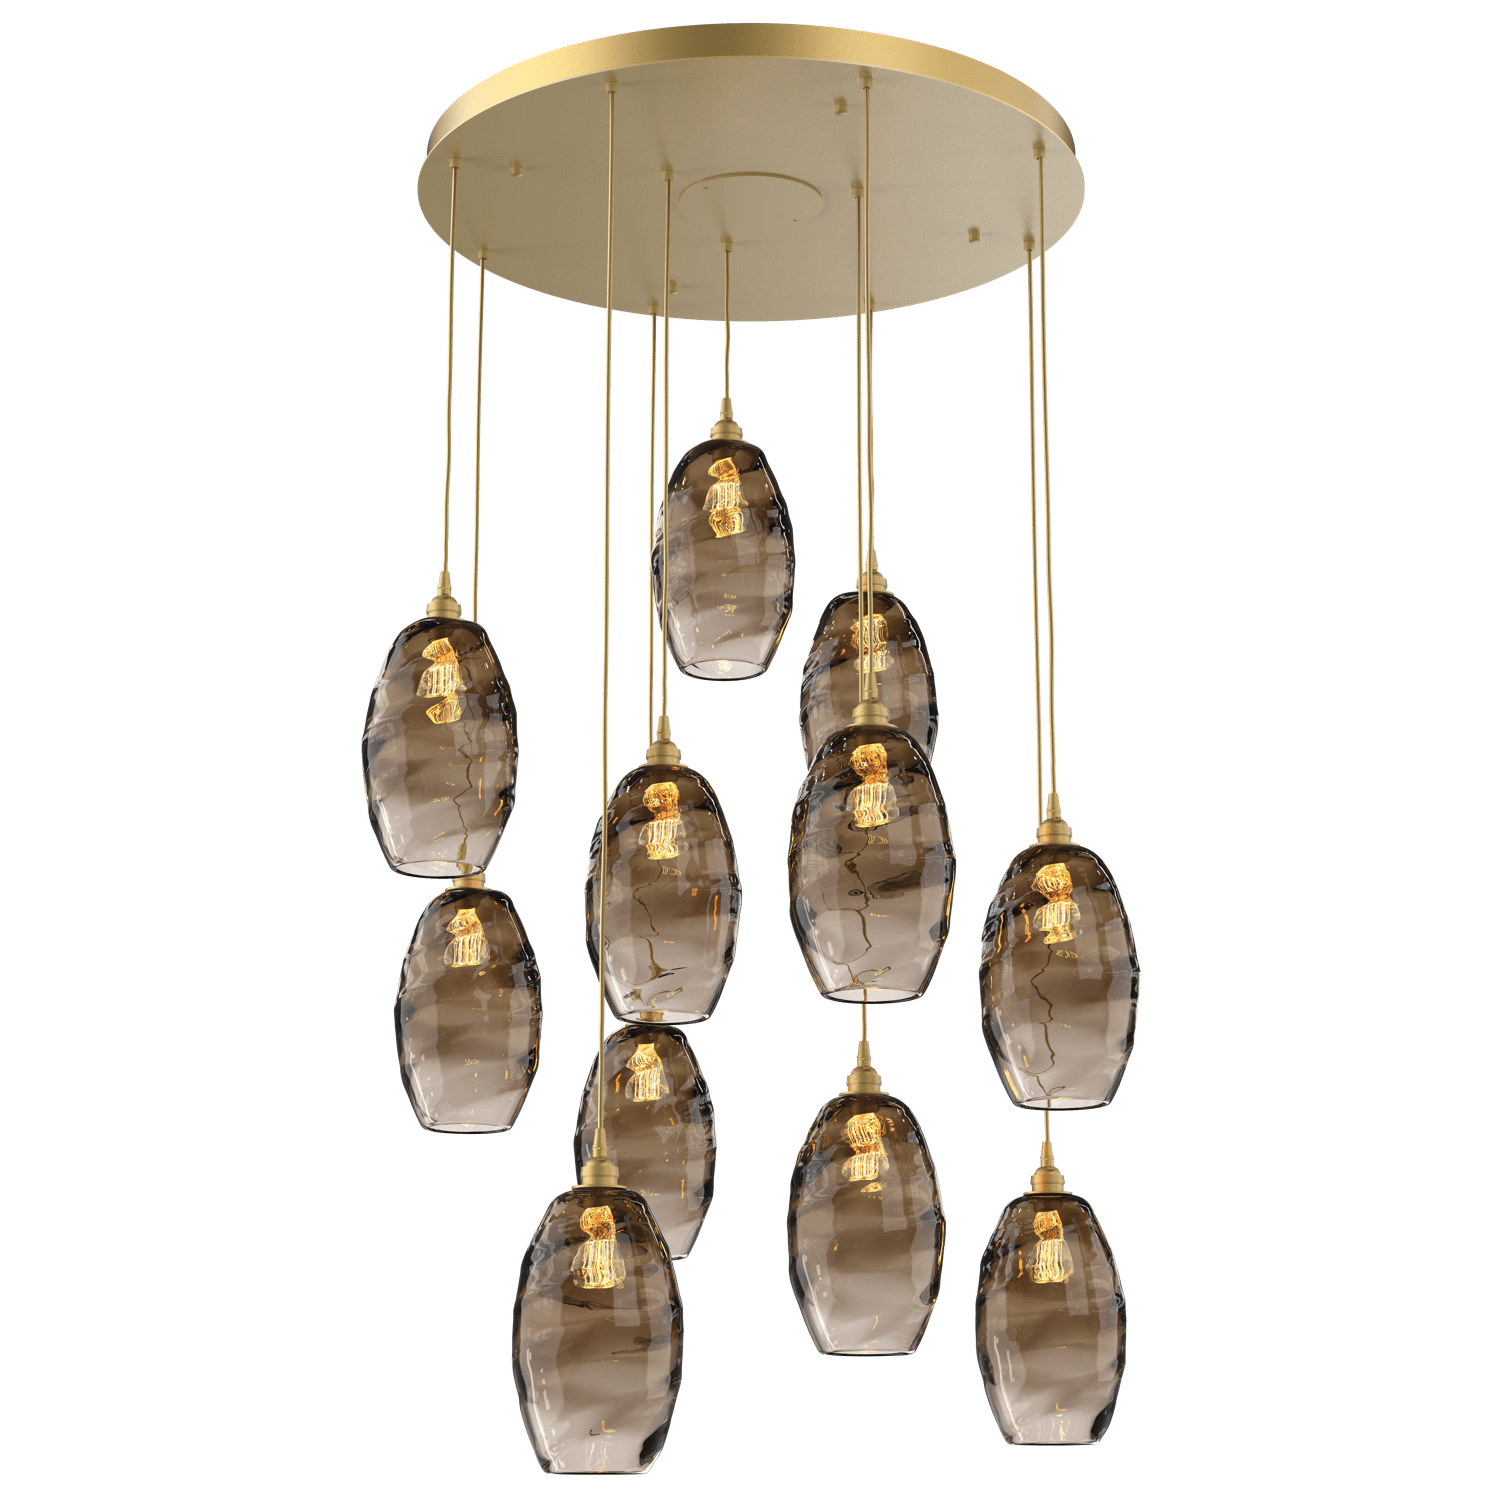 CHB0035-11-GB-OB-Hammerton-Studio-Optic-Blown-Glass-Elisse-11-light-round-pendant-chandelier-with-gilded-brass-finish-and-optic-bronze-blown-glass-shades-and-incandescent-lamping